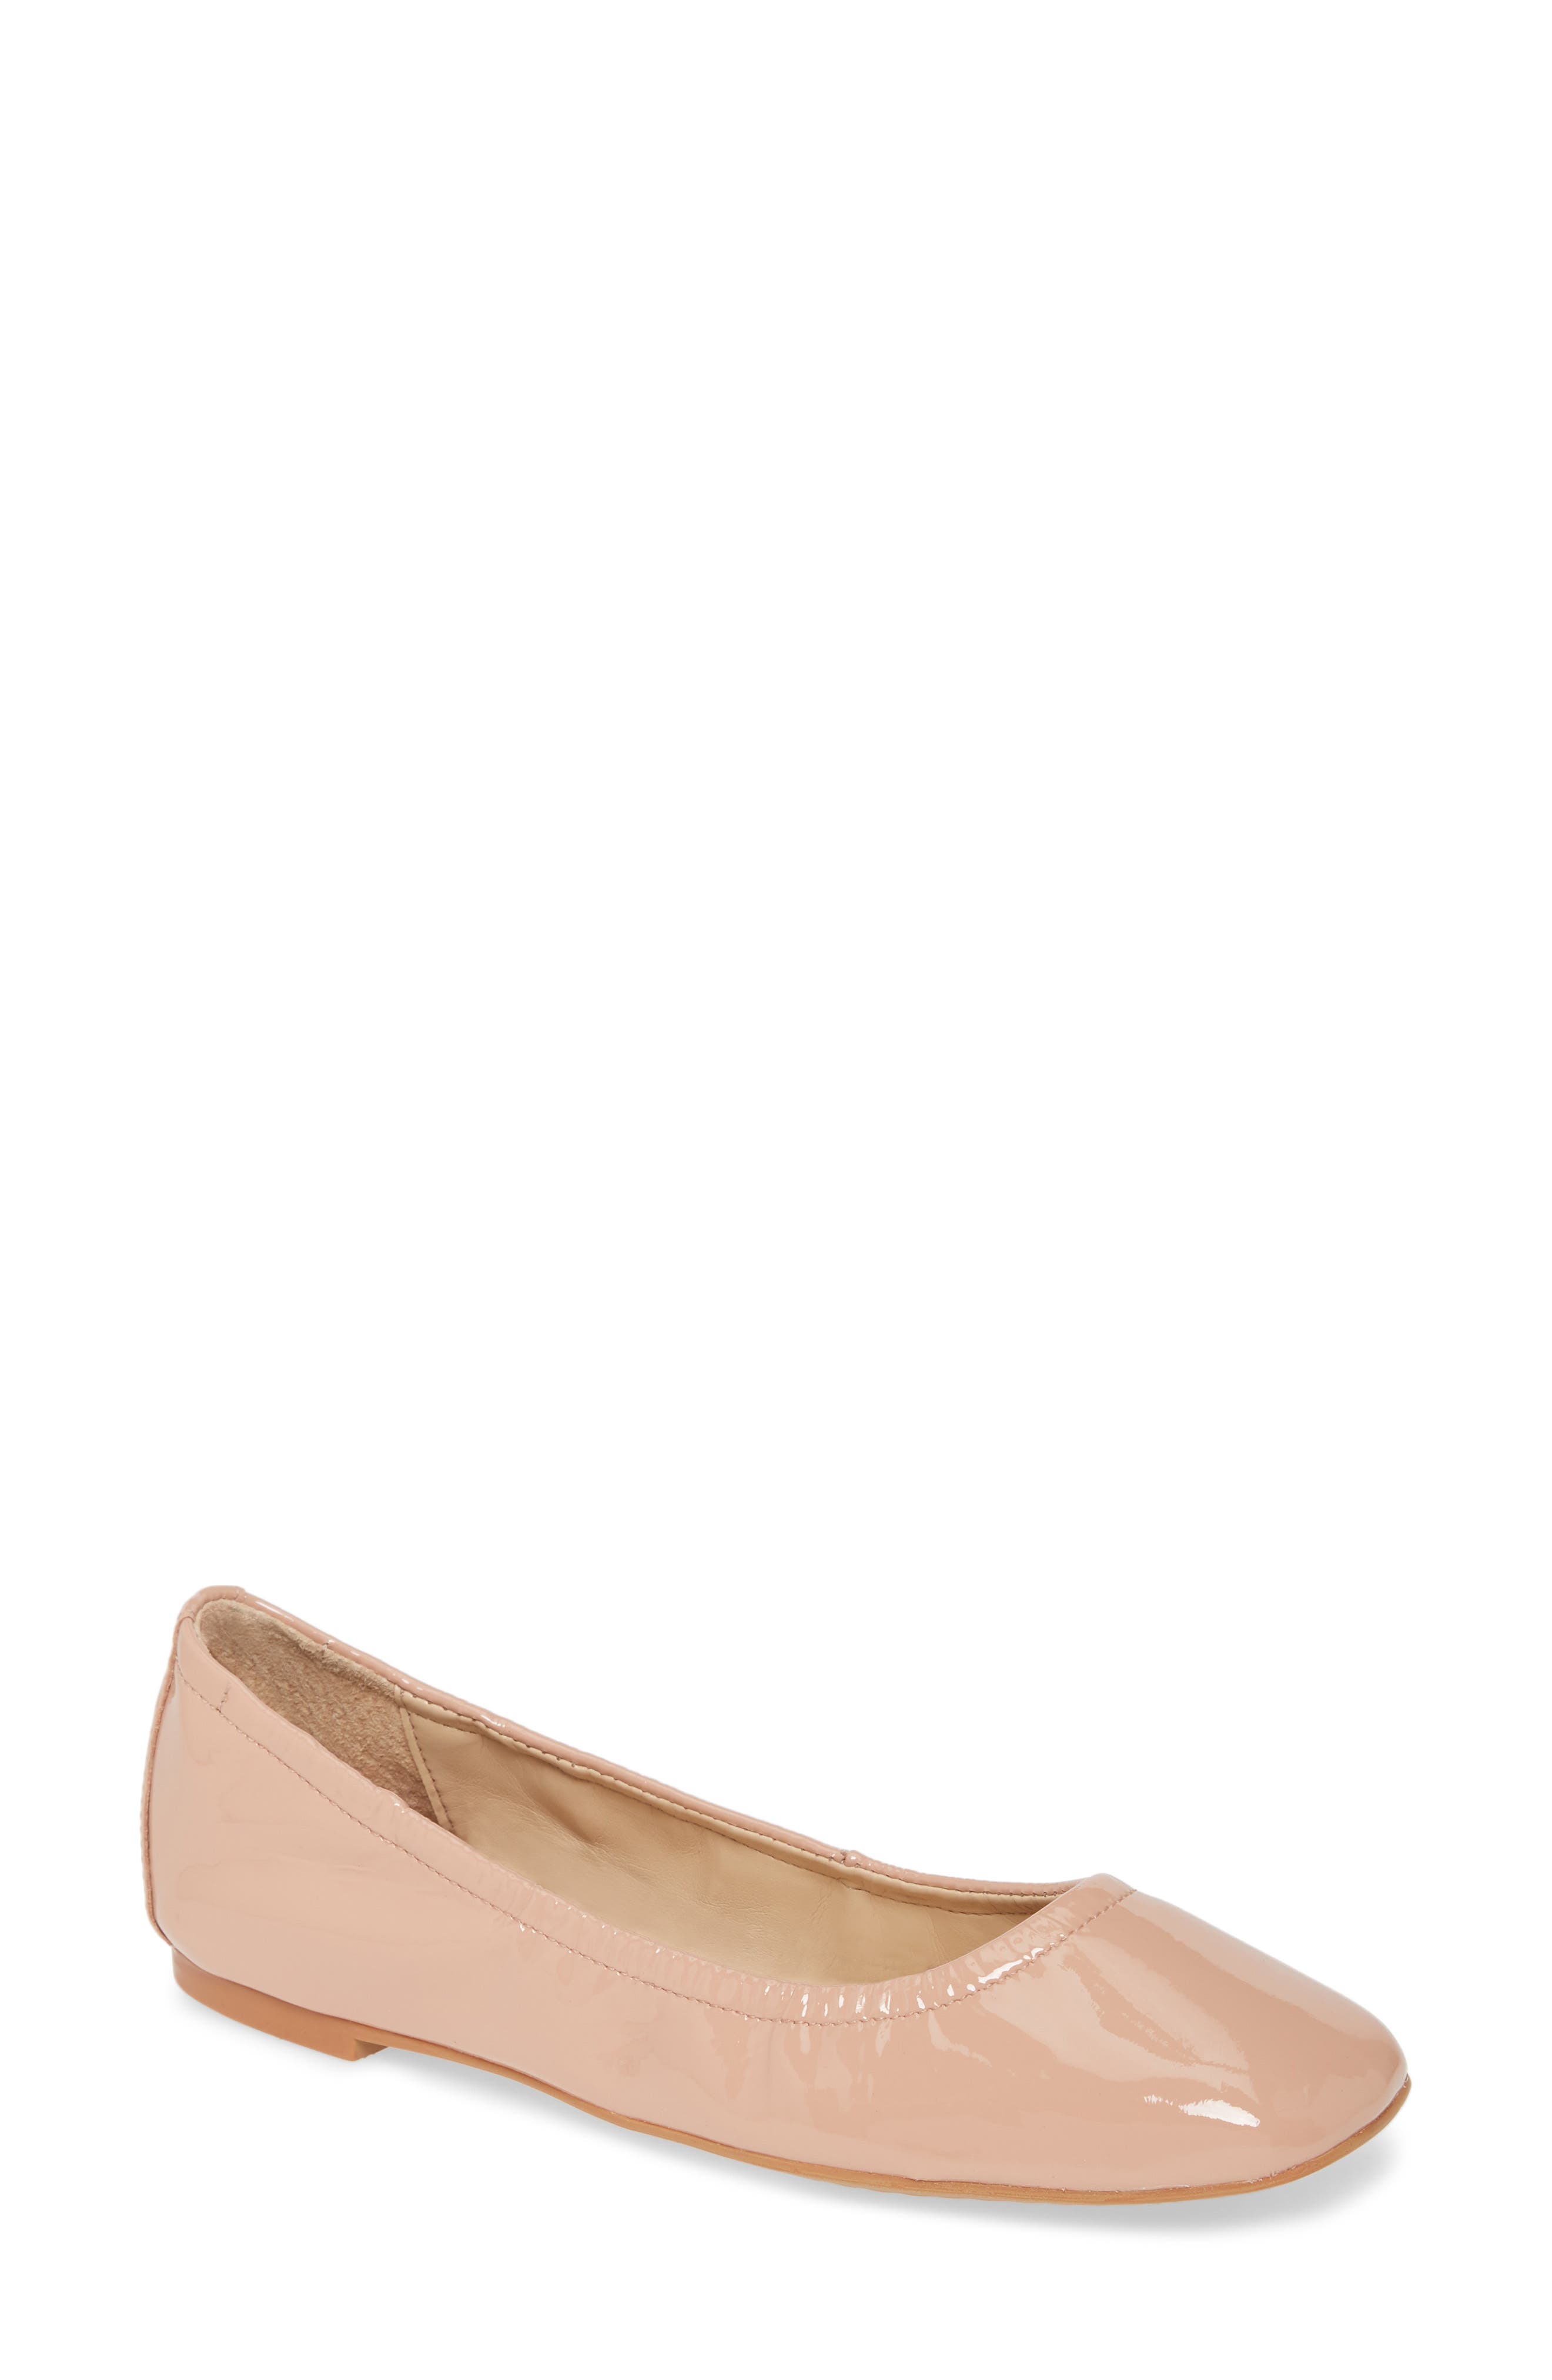 vince camuto suede flats